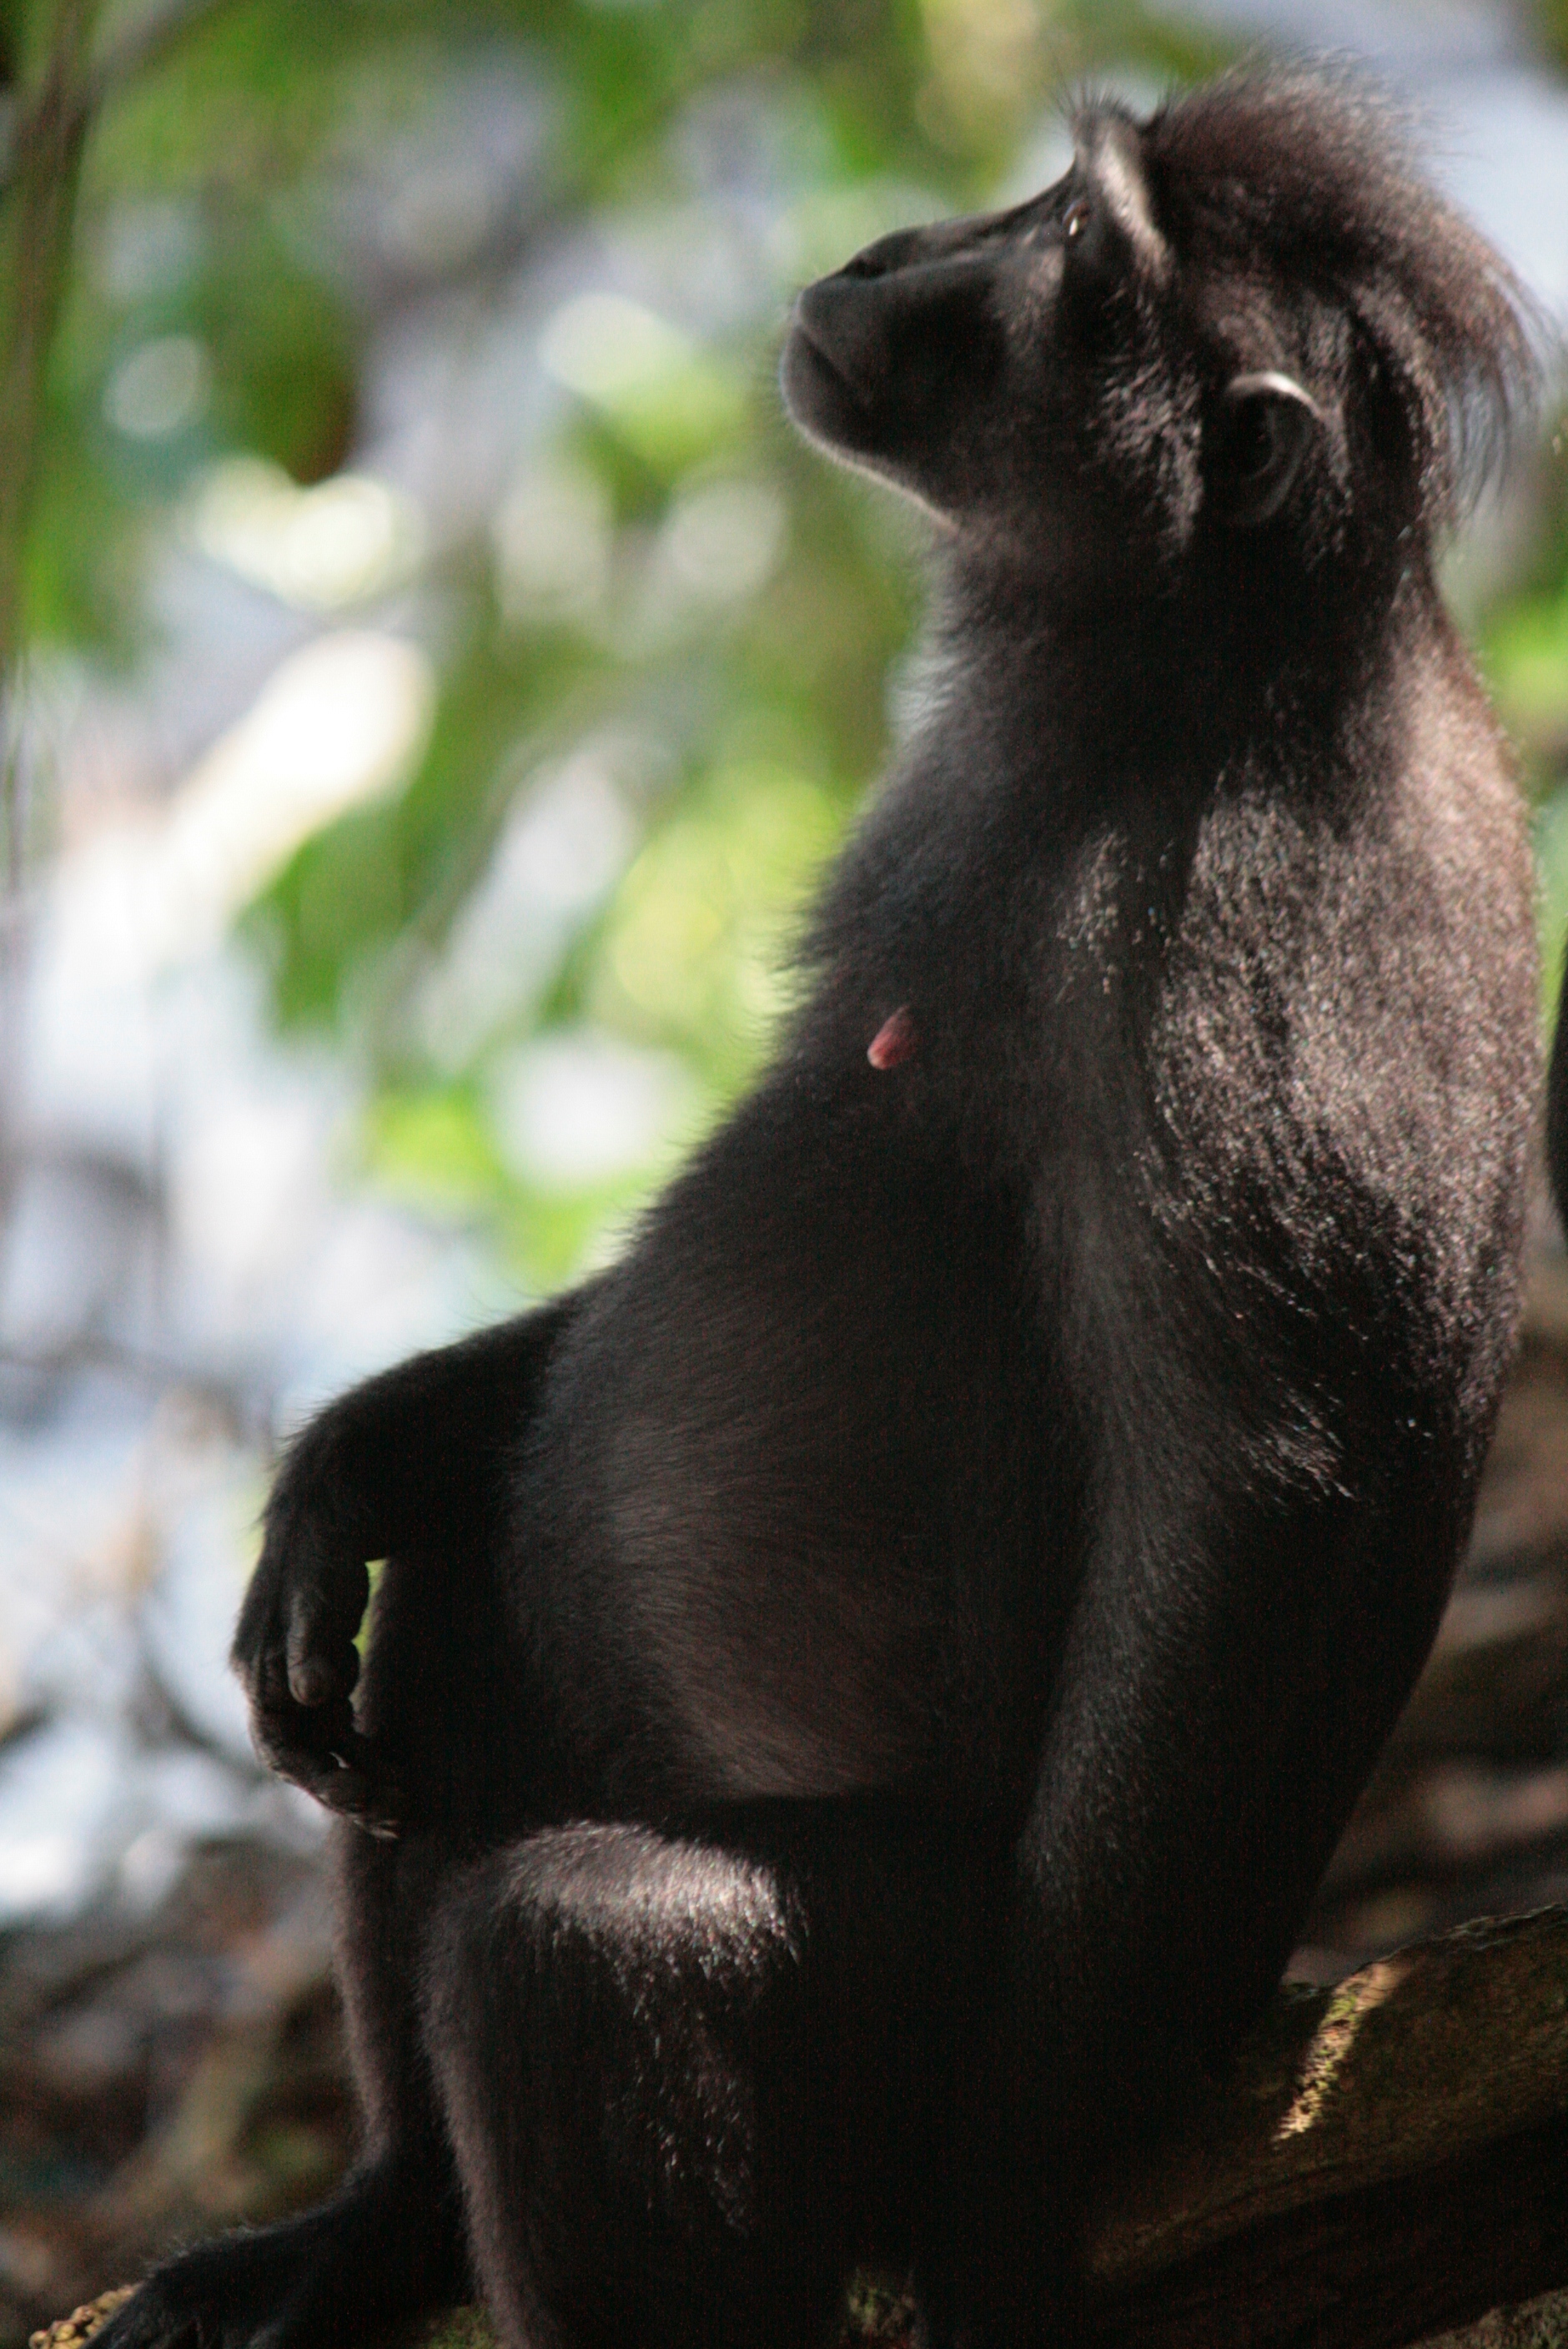 crested macaque